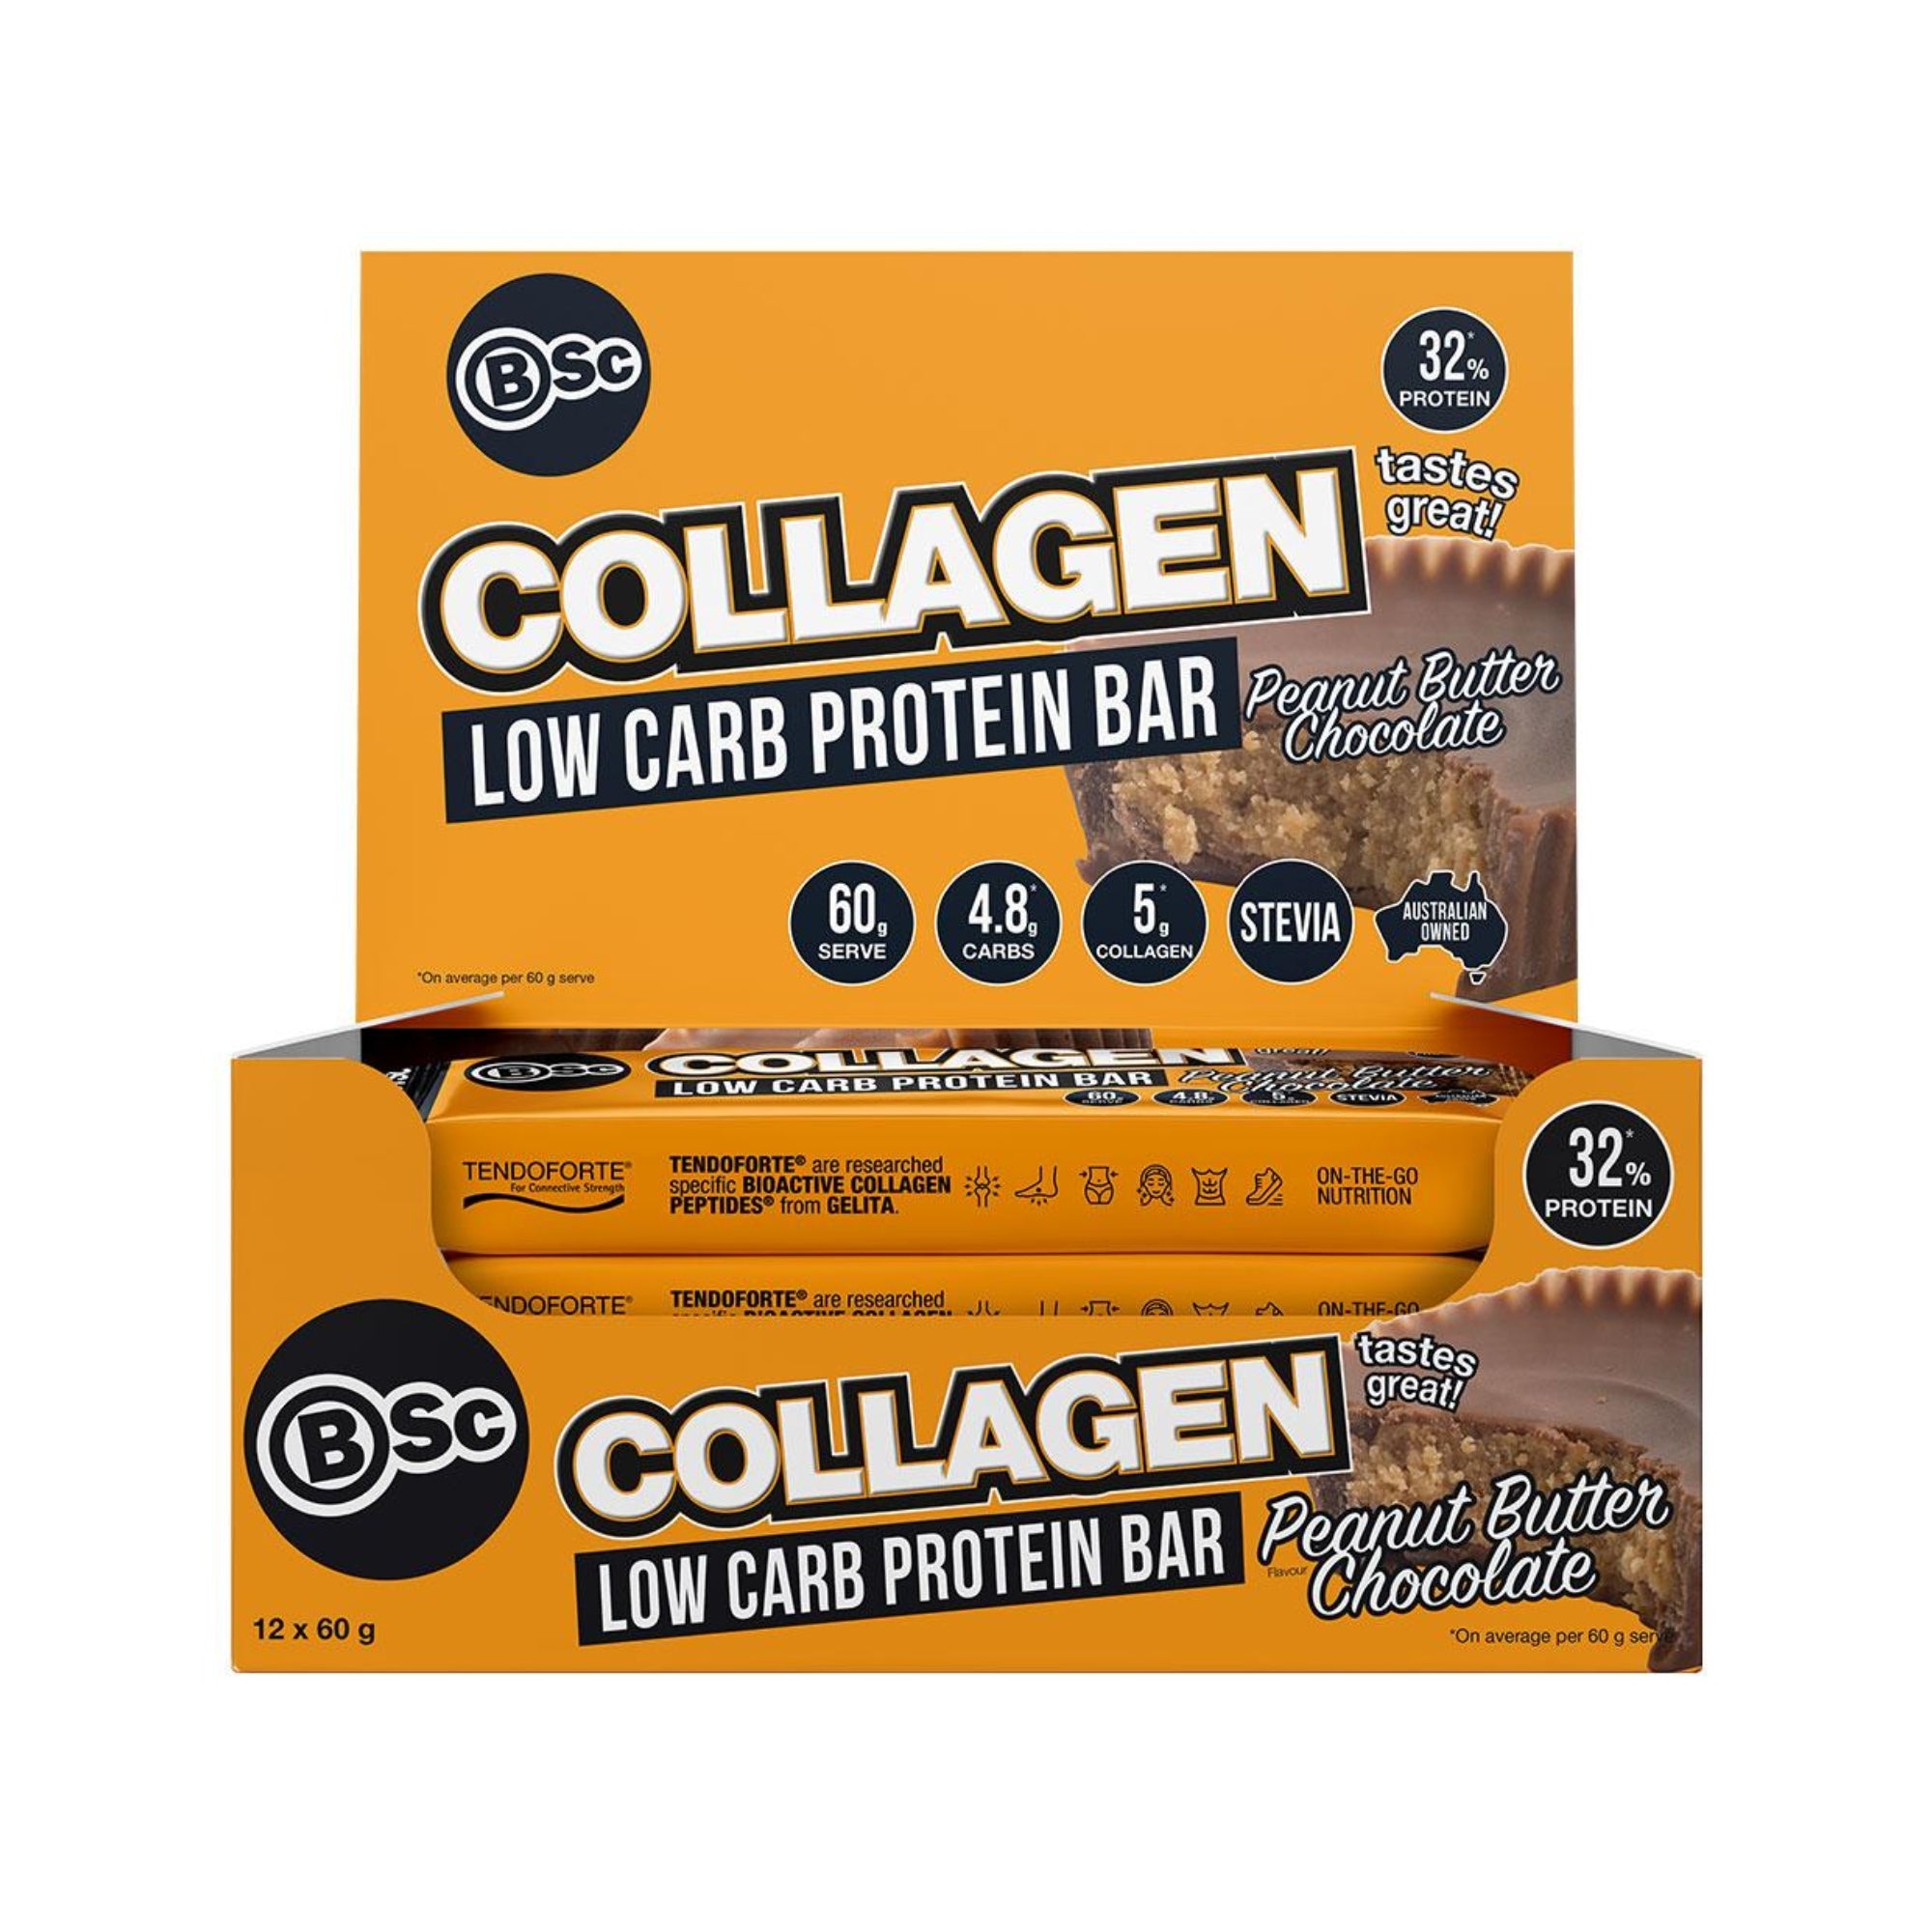 BSC Collagen Low Carb Protein Bar - Peanut Butter Chocolate